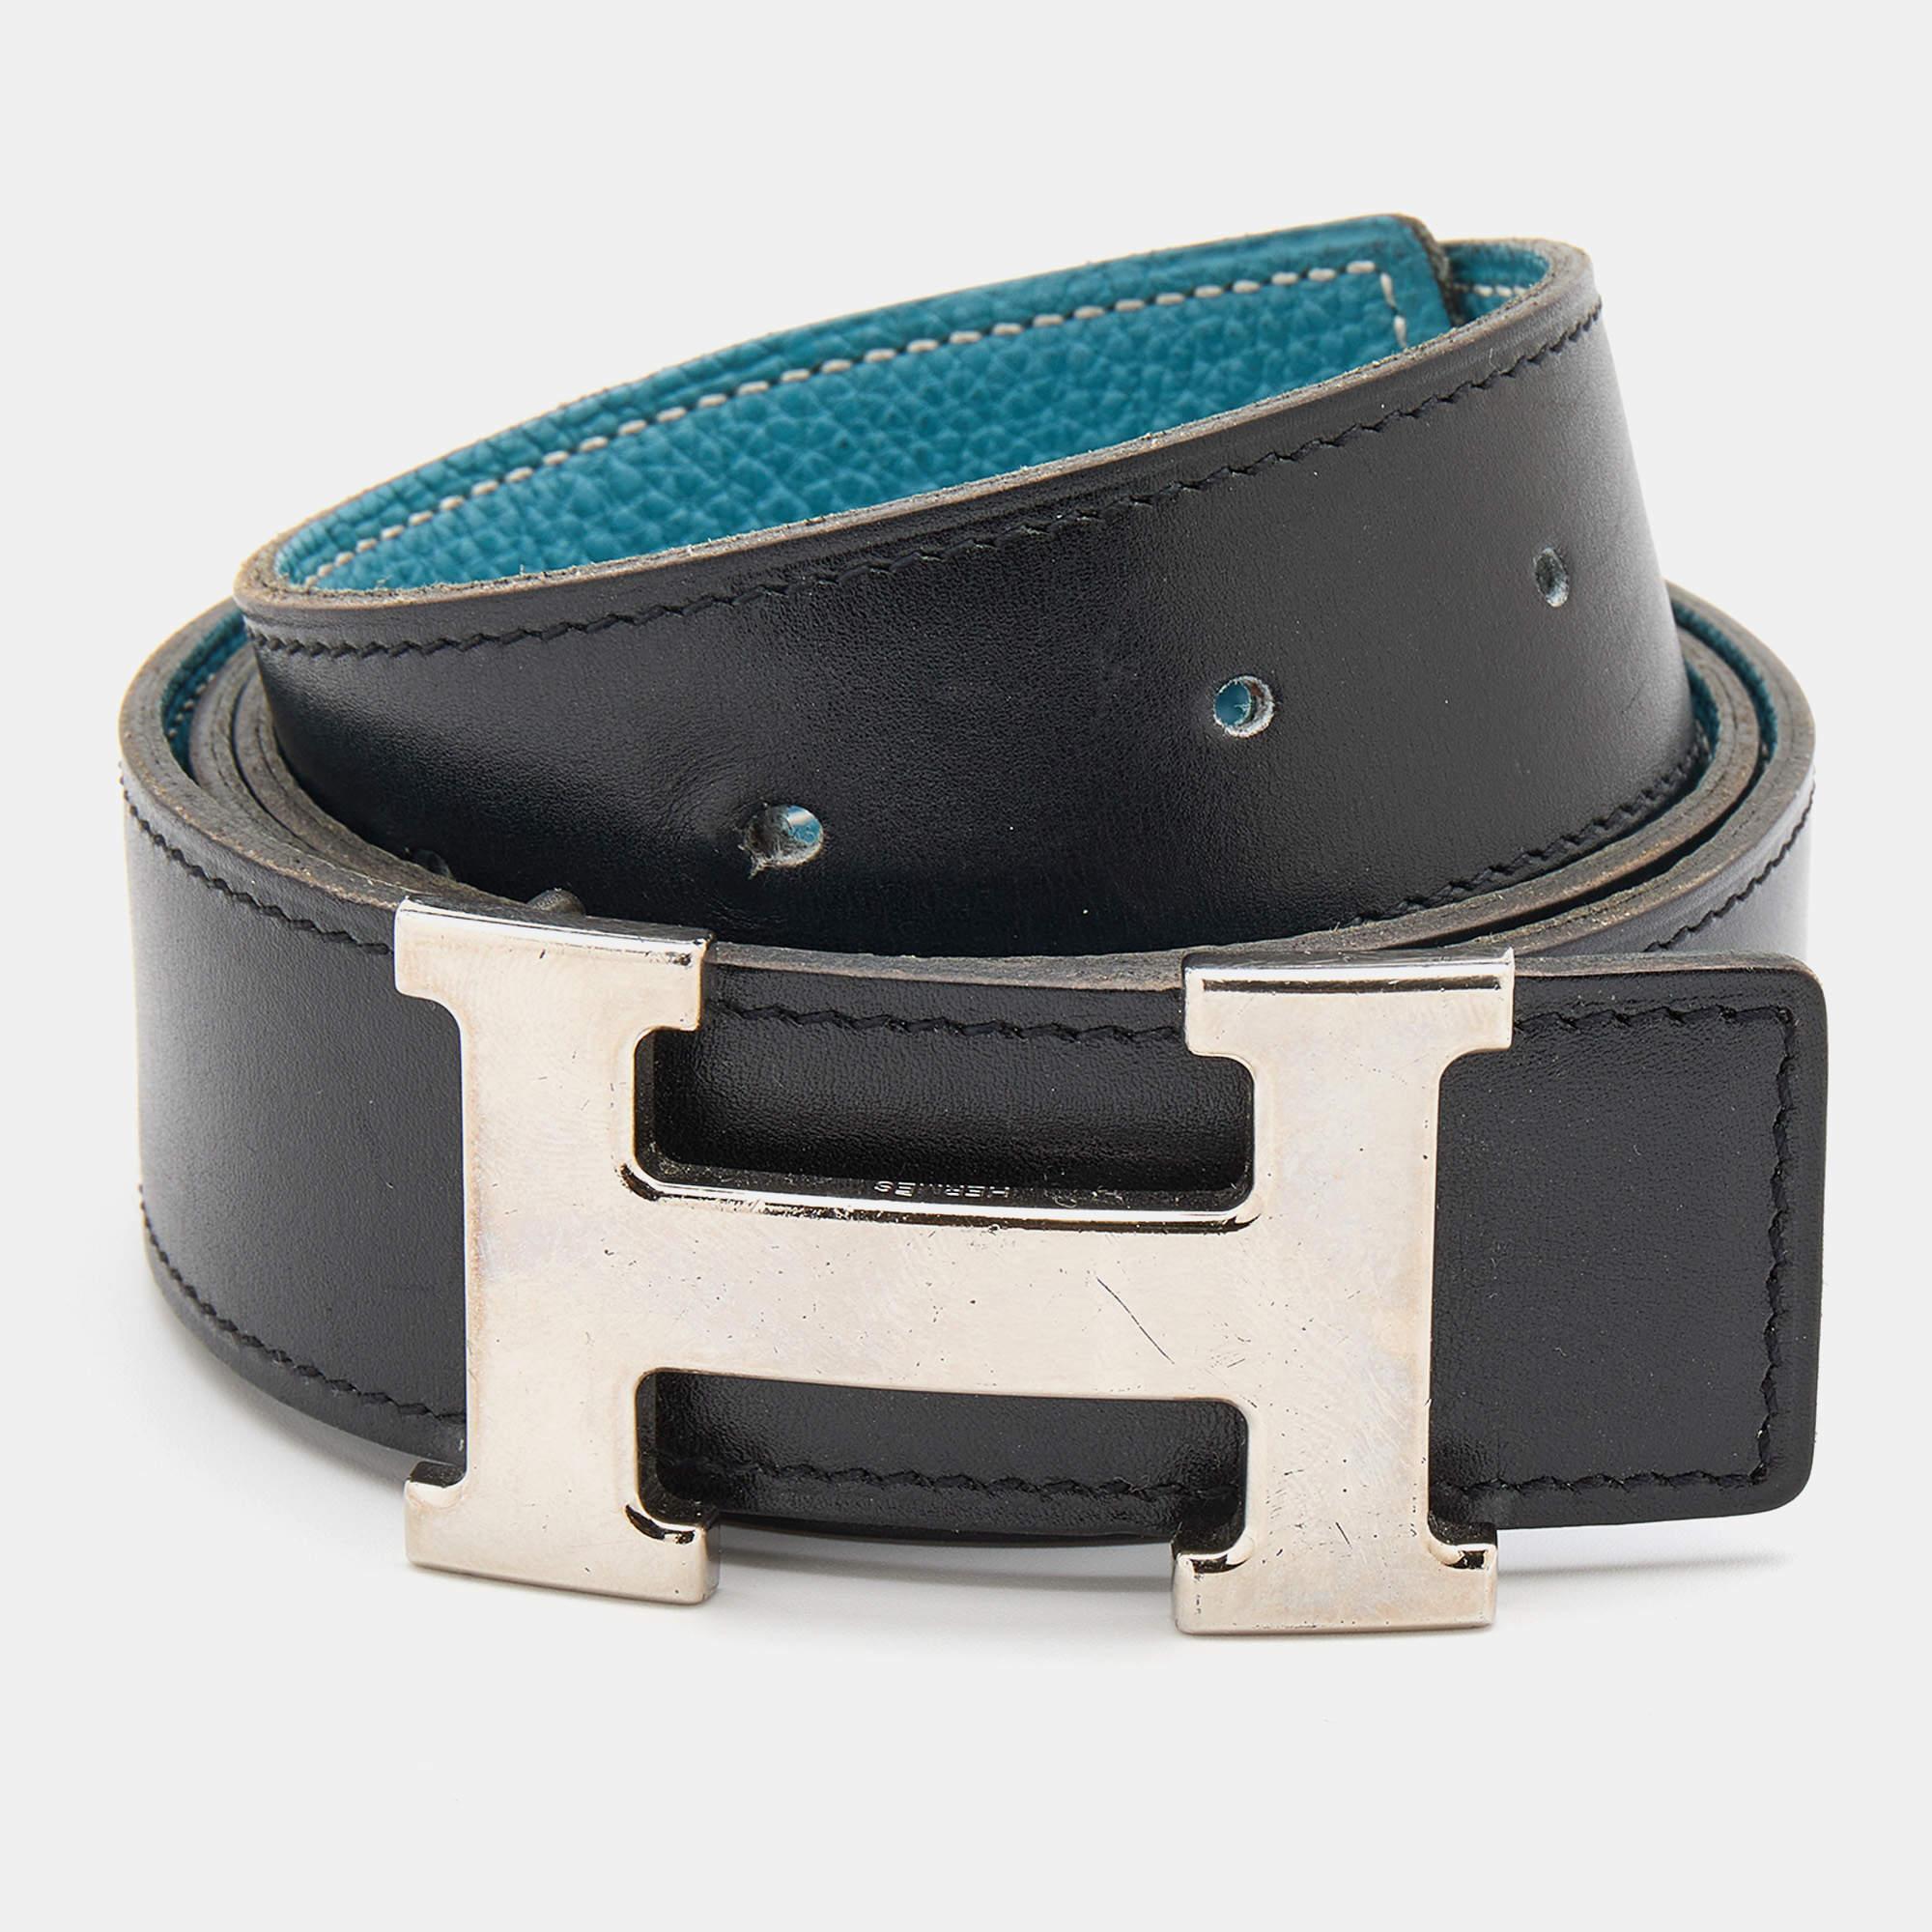 This designer belt brings a fashionable appeal. Crafted from durable material, it will pair well with most outfits.

Includes: Original Dustbag
